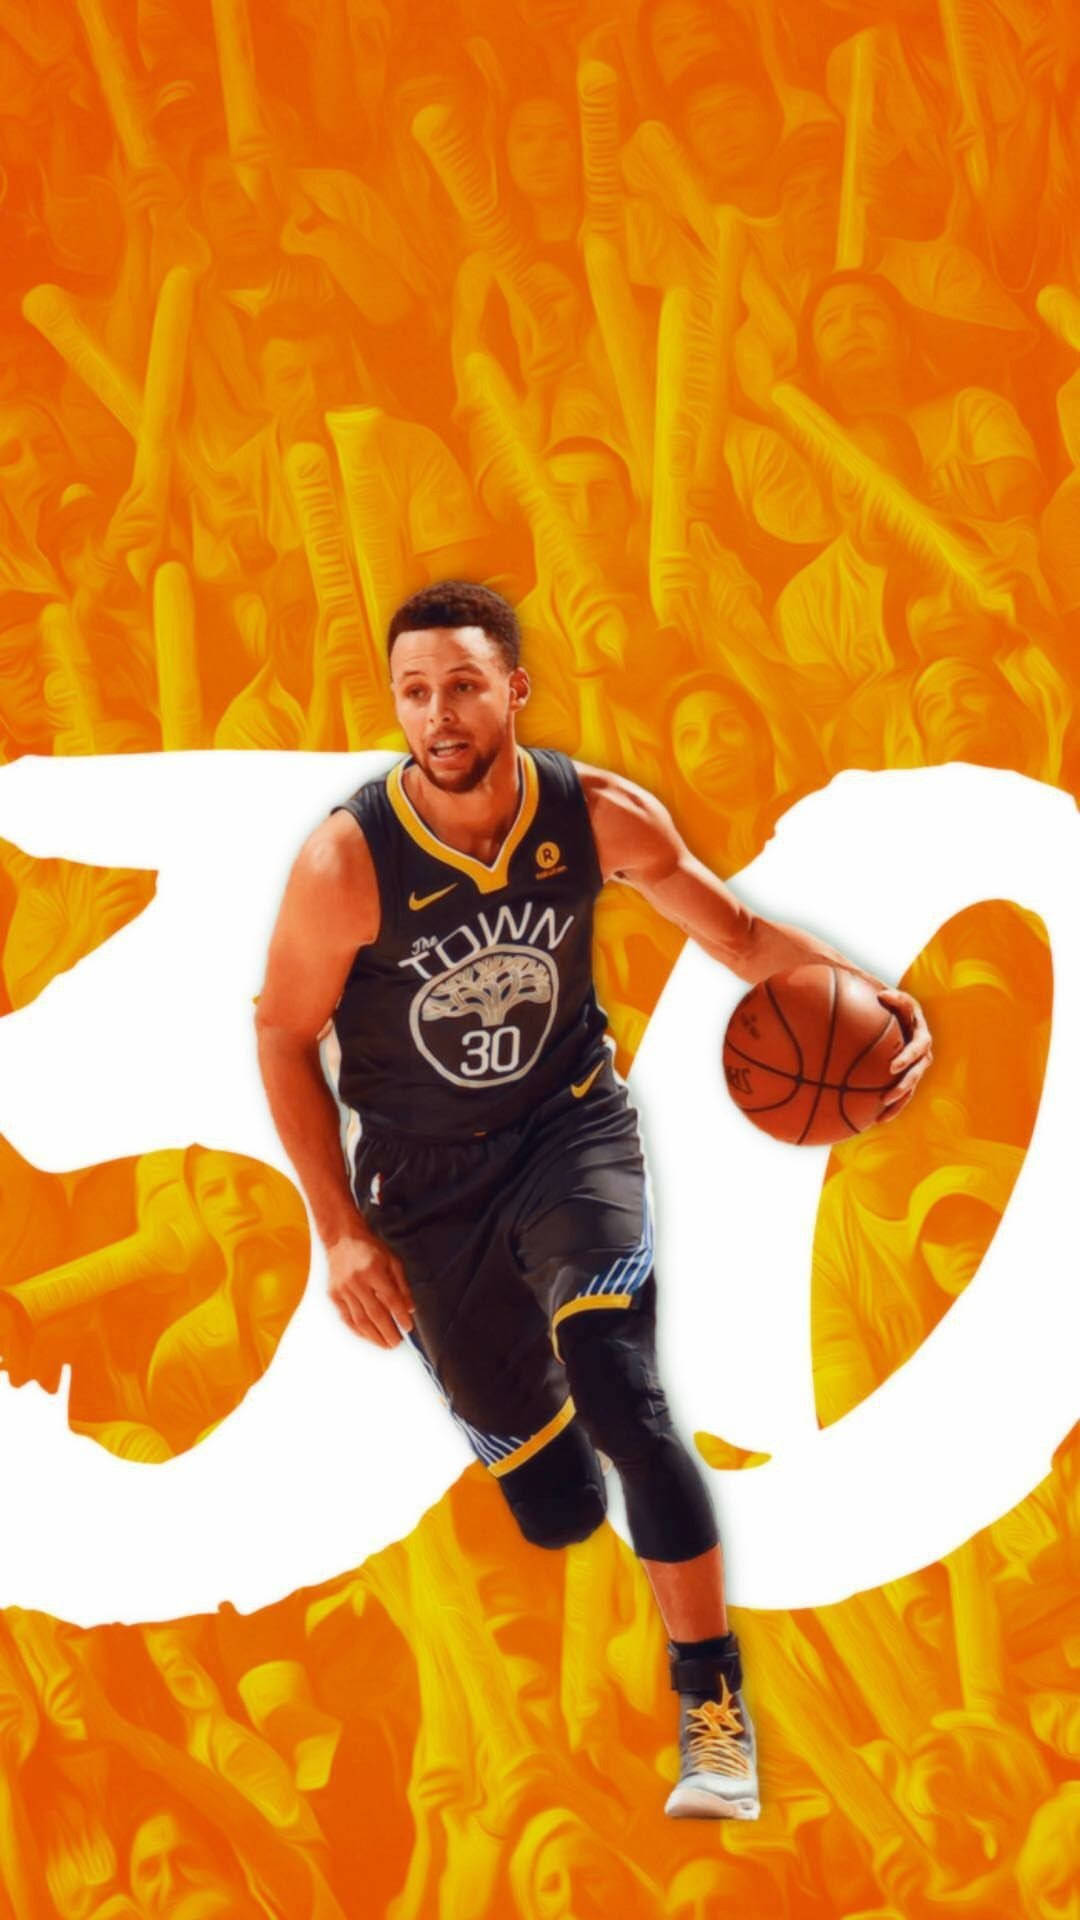 Images Of Home Screen Cartoon Stephen Curry Wallpaper